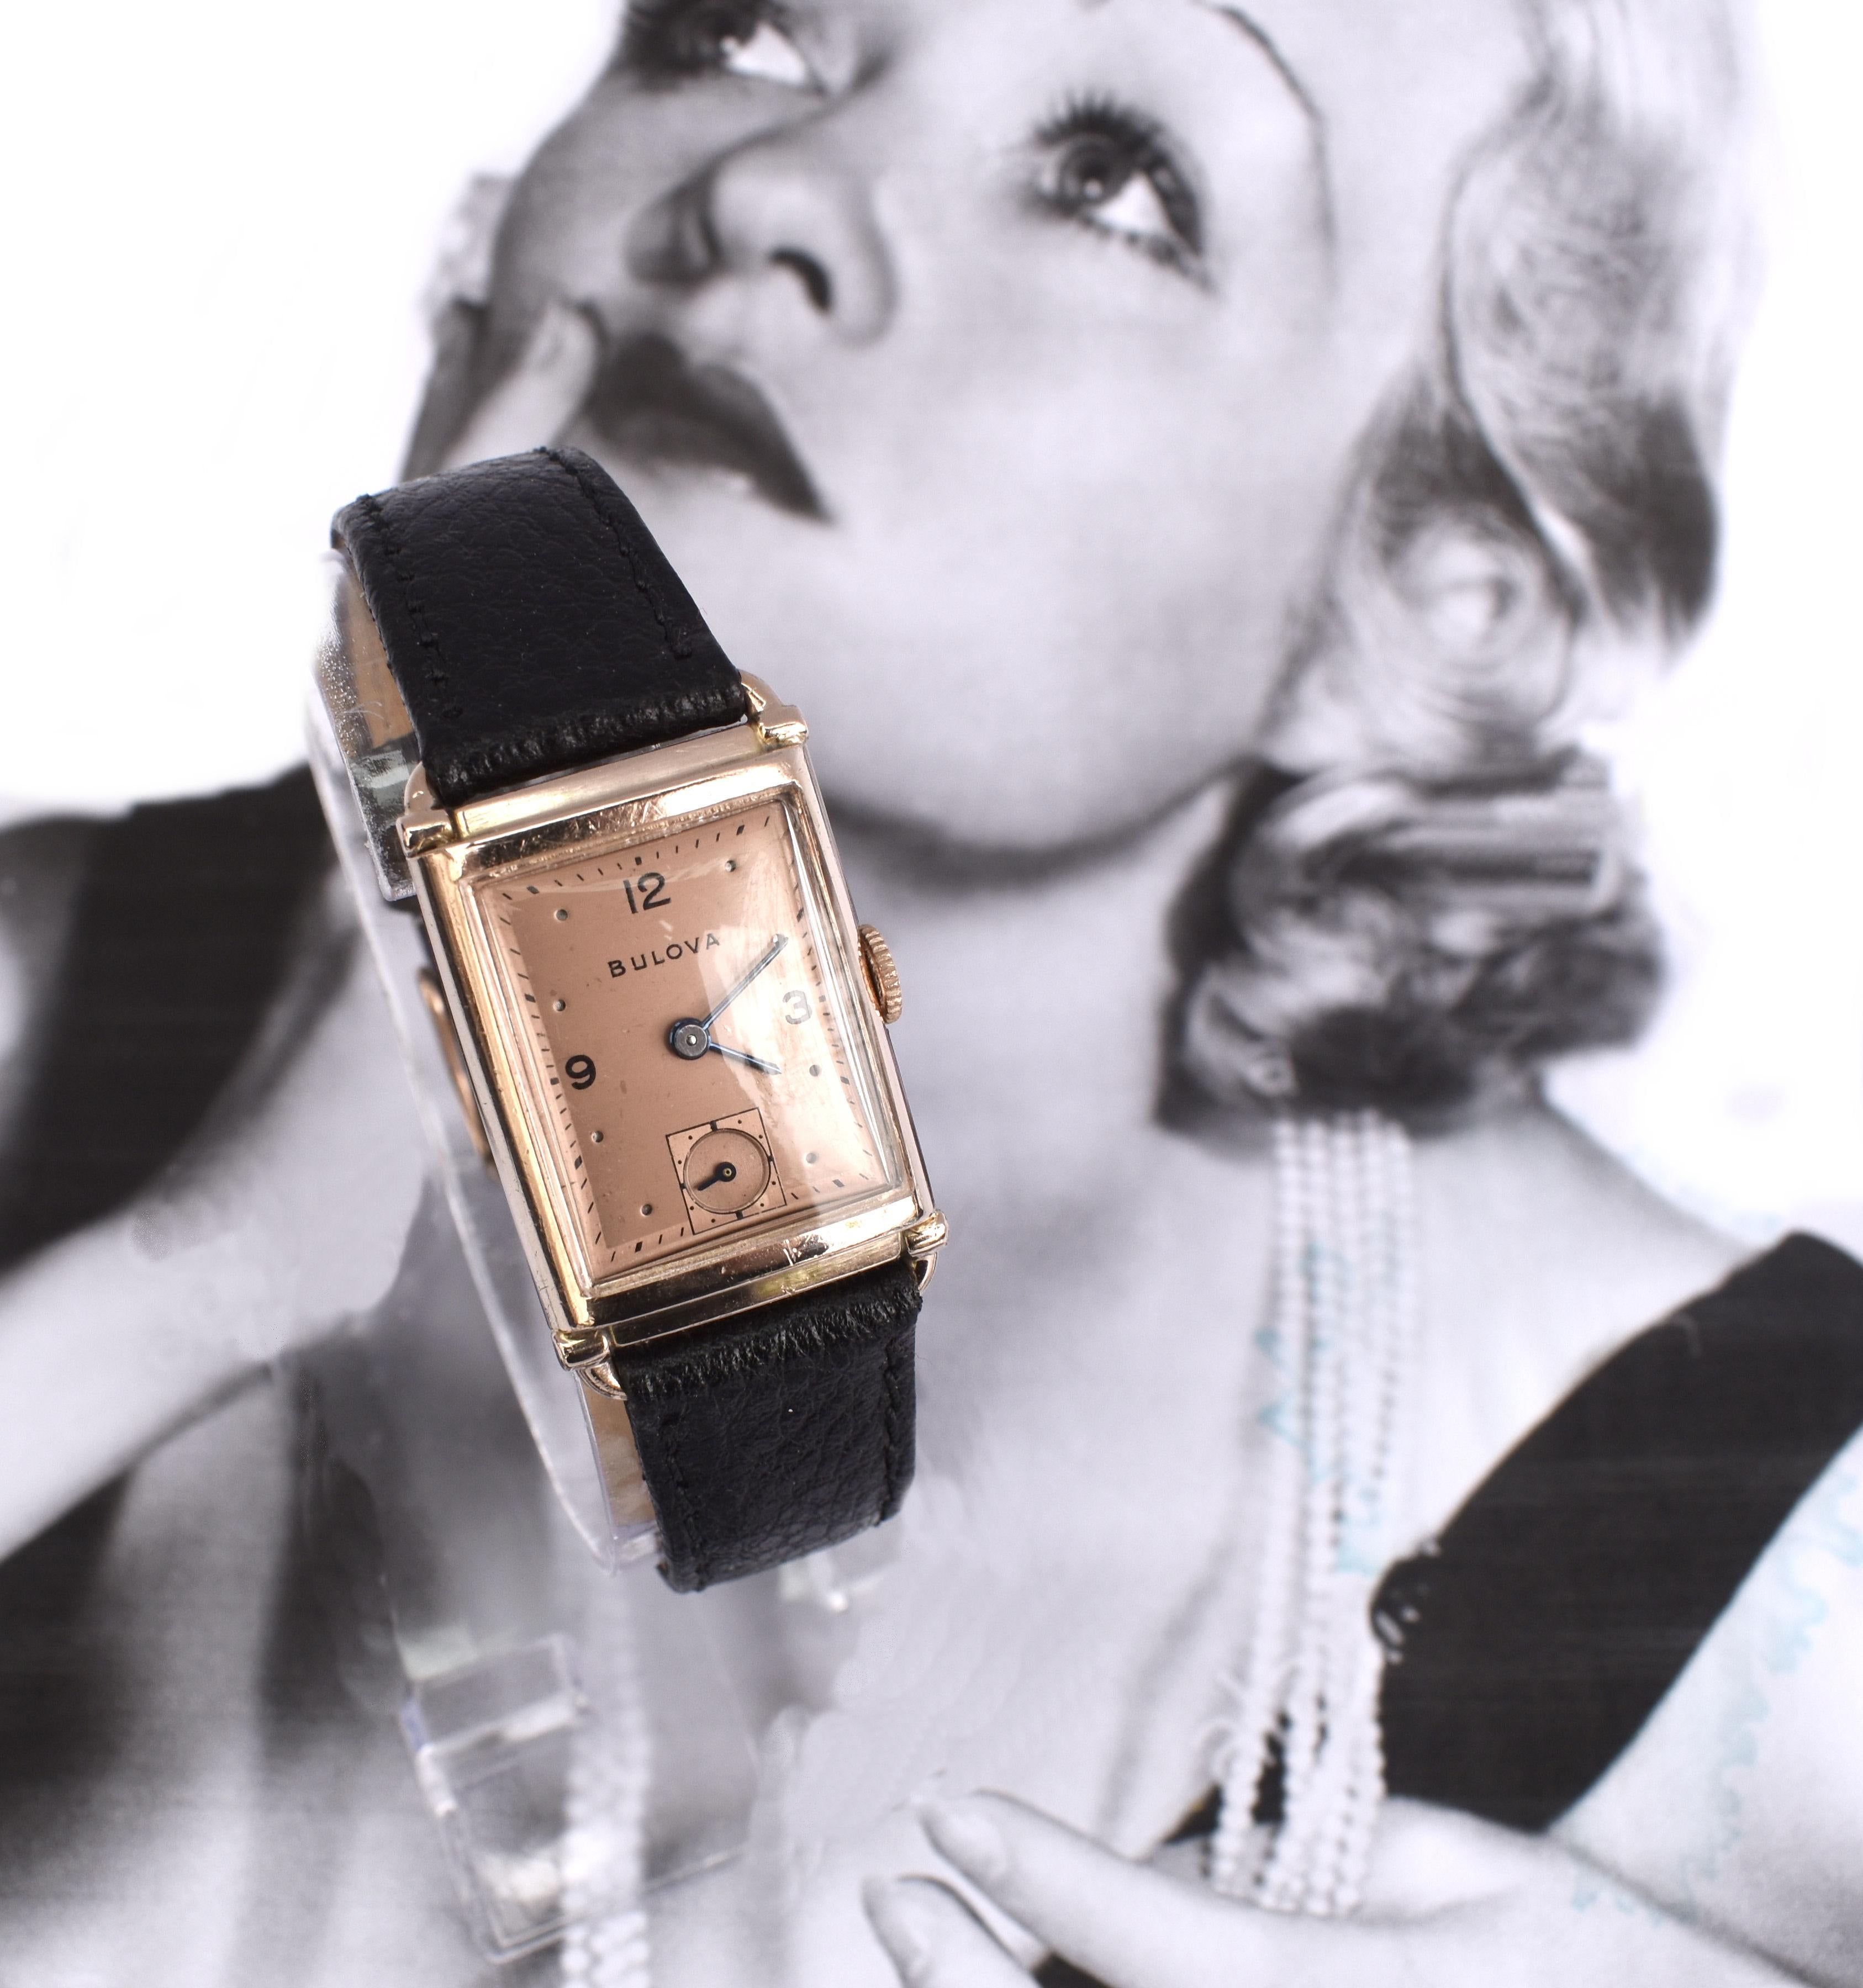 For your consideration is this fabulously stylish Art Deco Gents manual wrist watch by the American watch company Bulova. This 73 year old Art Deco watch known as the ‘PRESIDENT’ has a 14k rose gold-filled case and rare two-tone copper/ rose